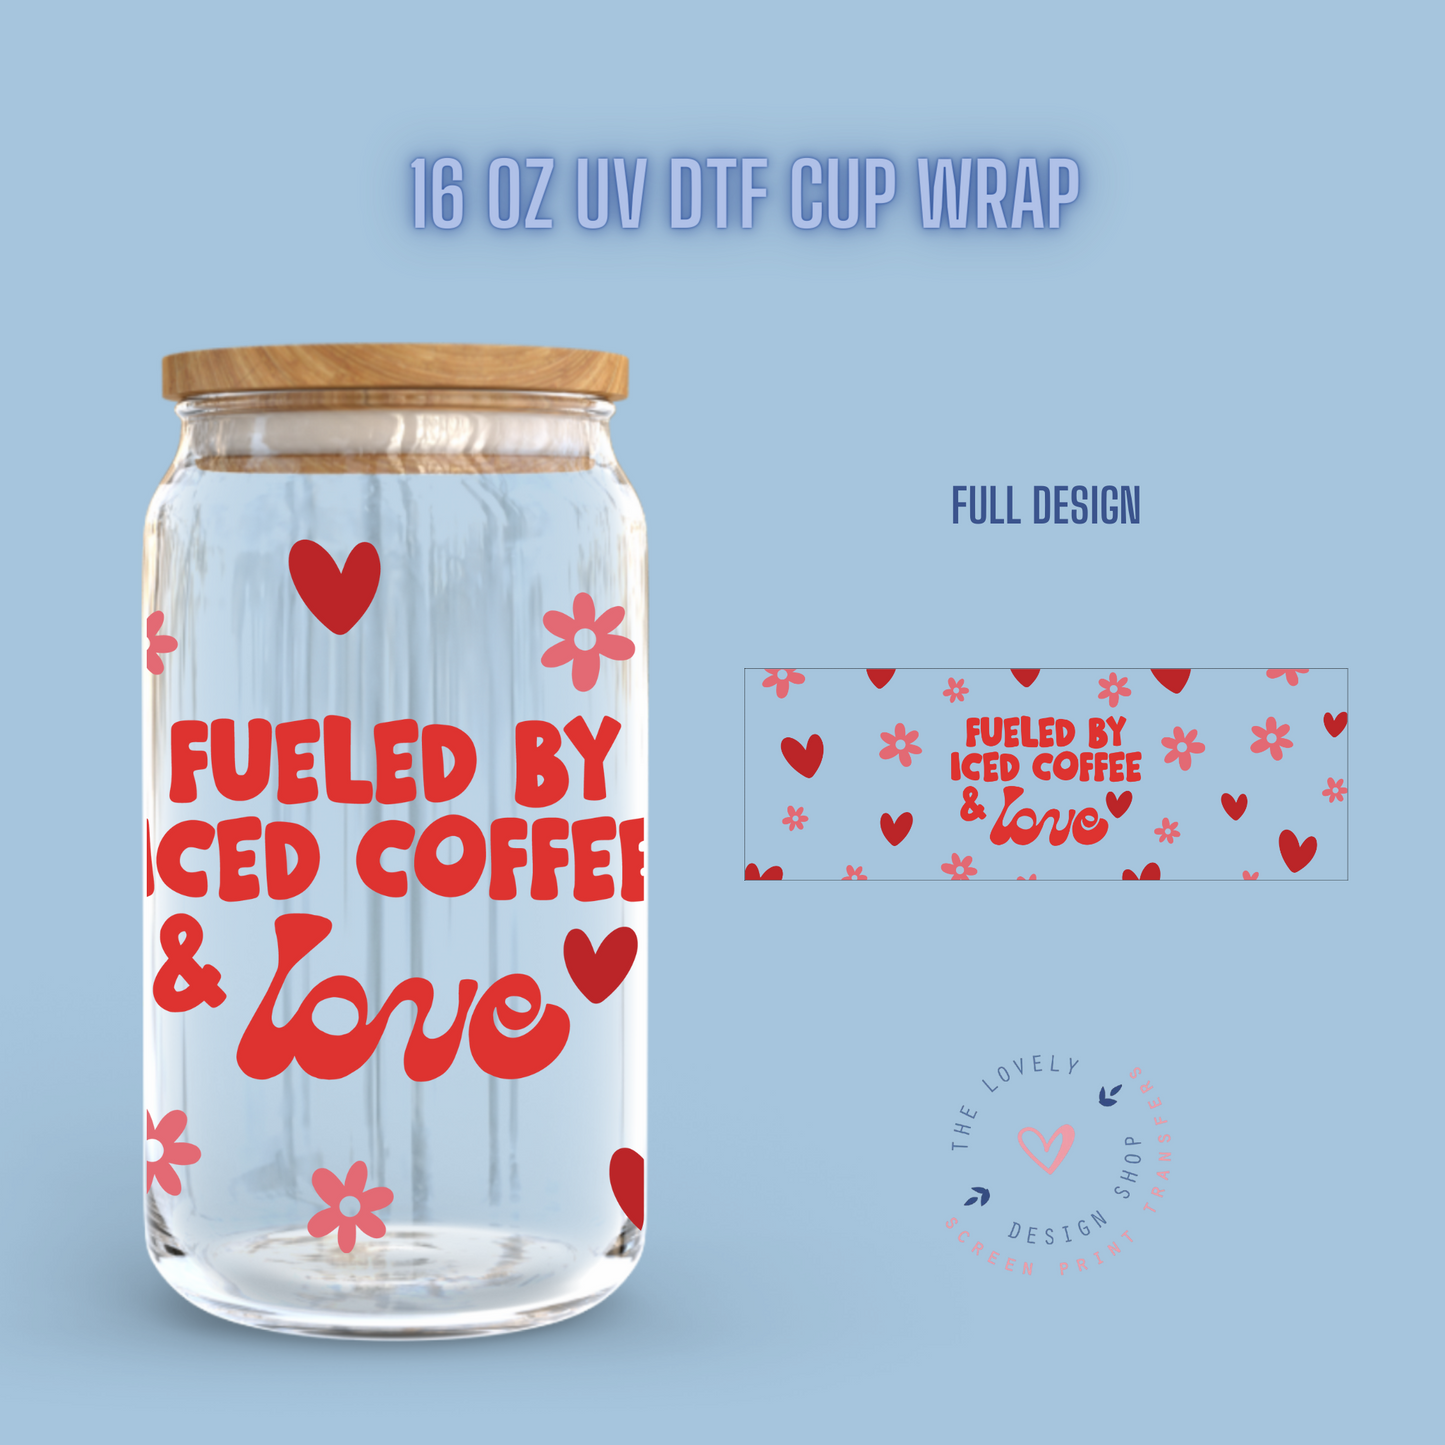 Fueled By Iced Coffee & Love - UV DTF 16 oz Libbey Cup Wrap (Ready to Ship)